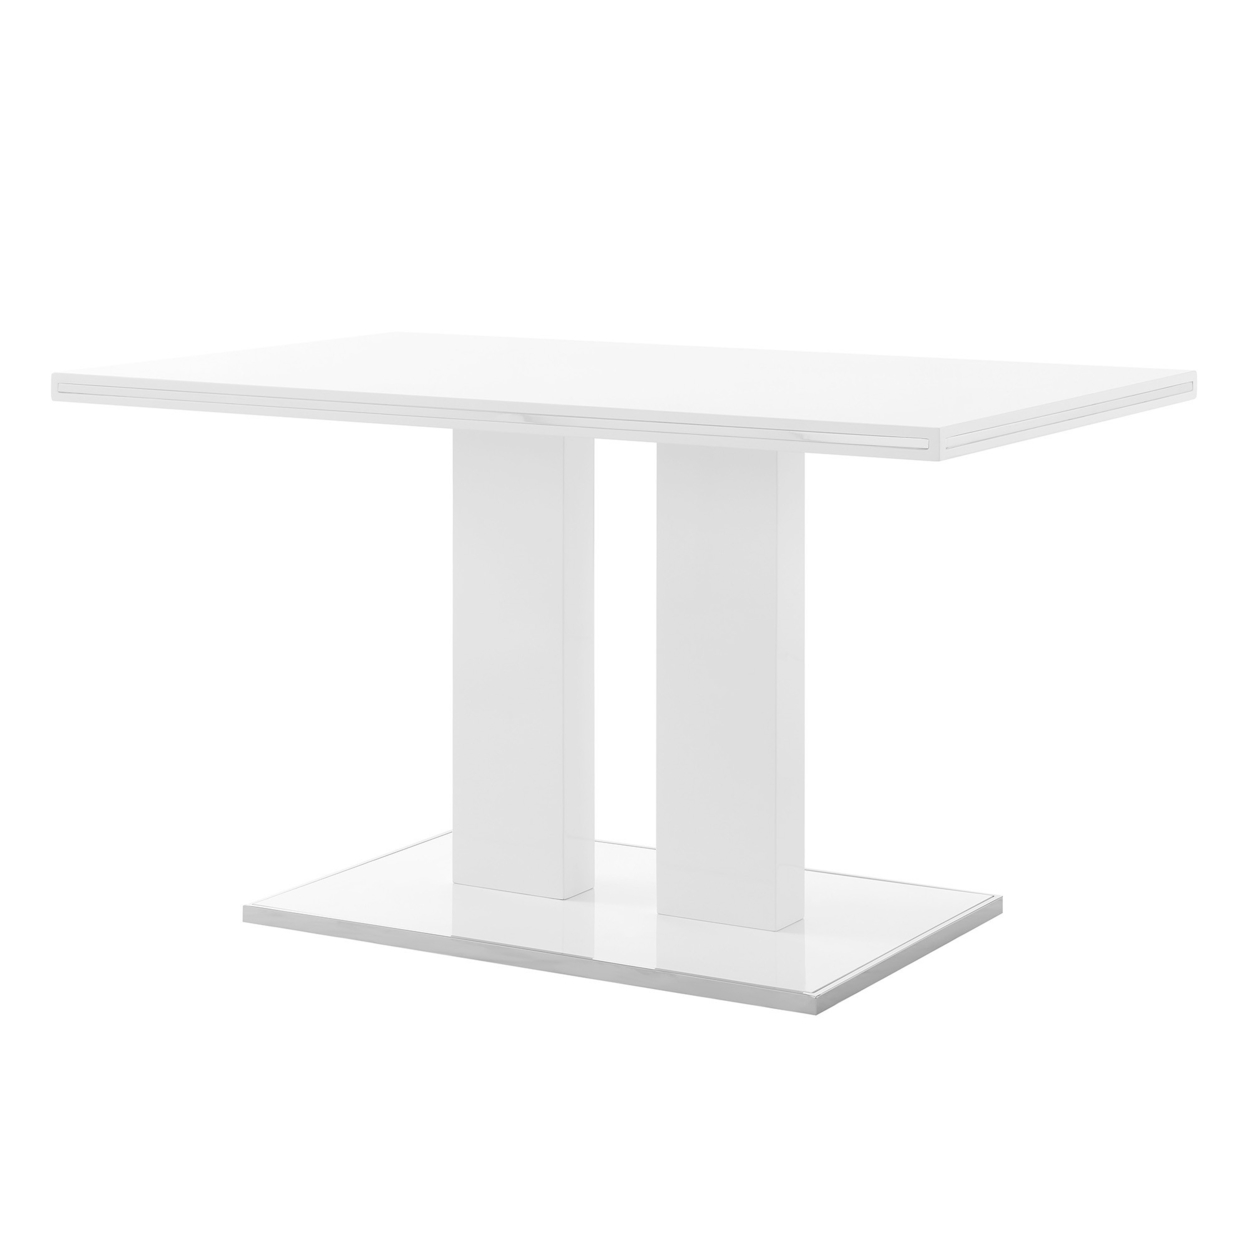 51 Inch Dining Table With Lacquer Coated Top And Metal Base, White- Saltoro Sherpi